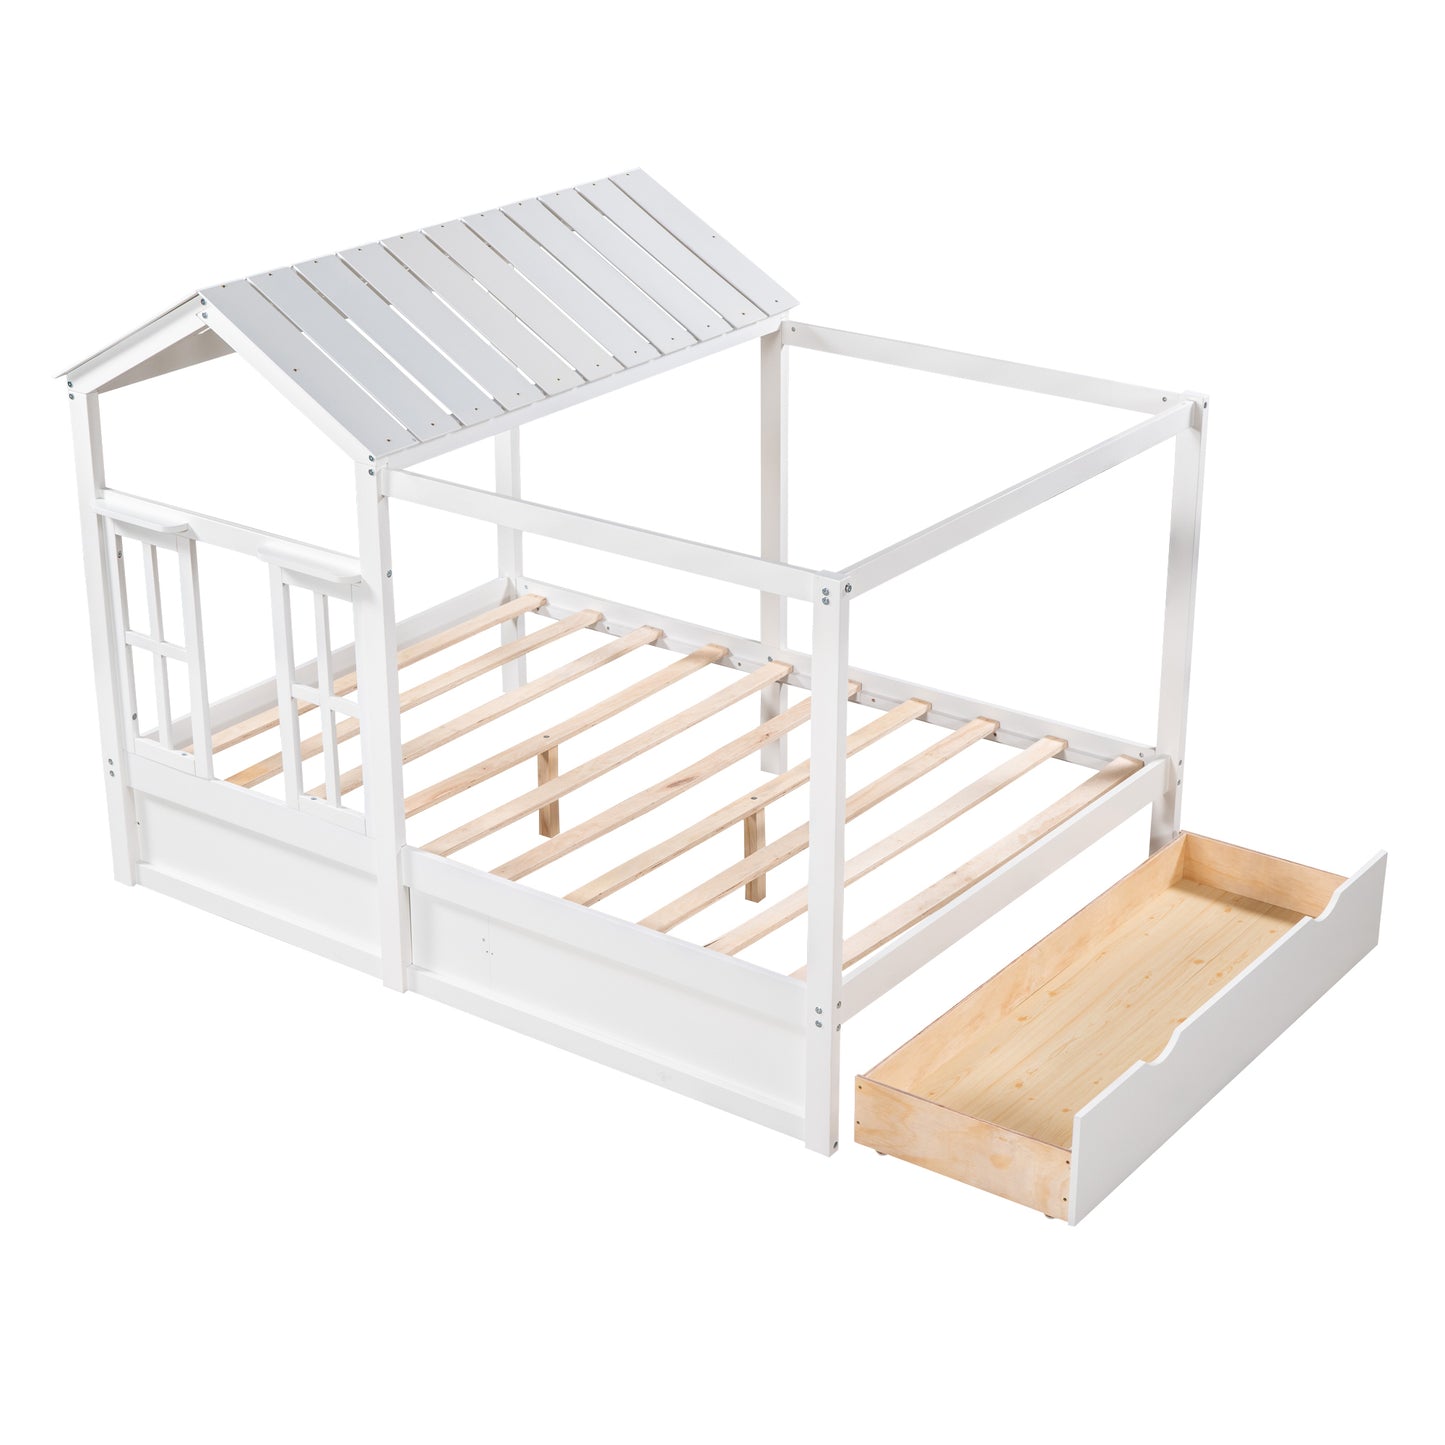 Full Size House Bed with Roof, Window and Drawer - White